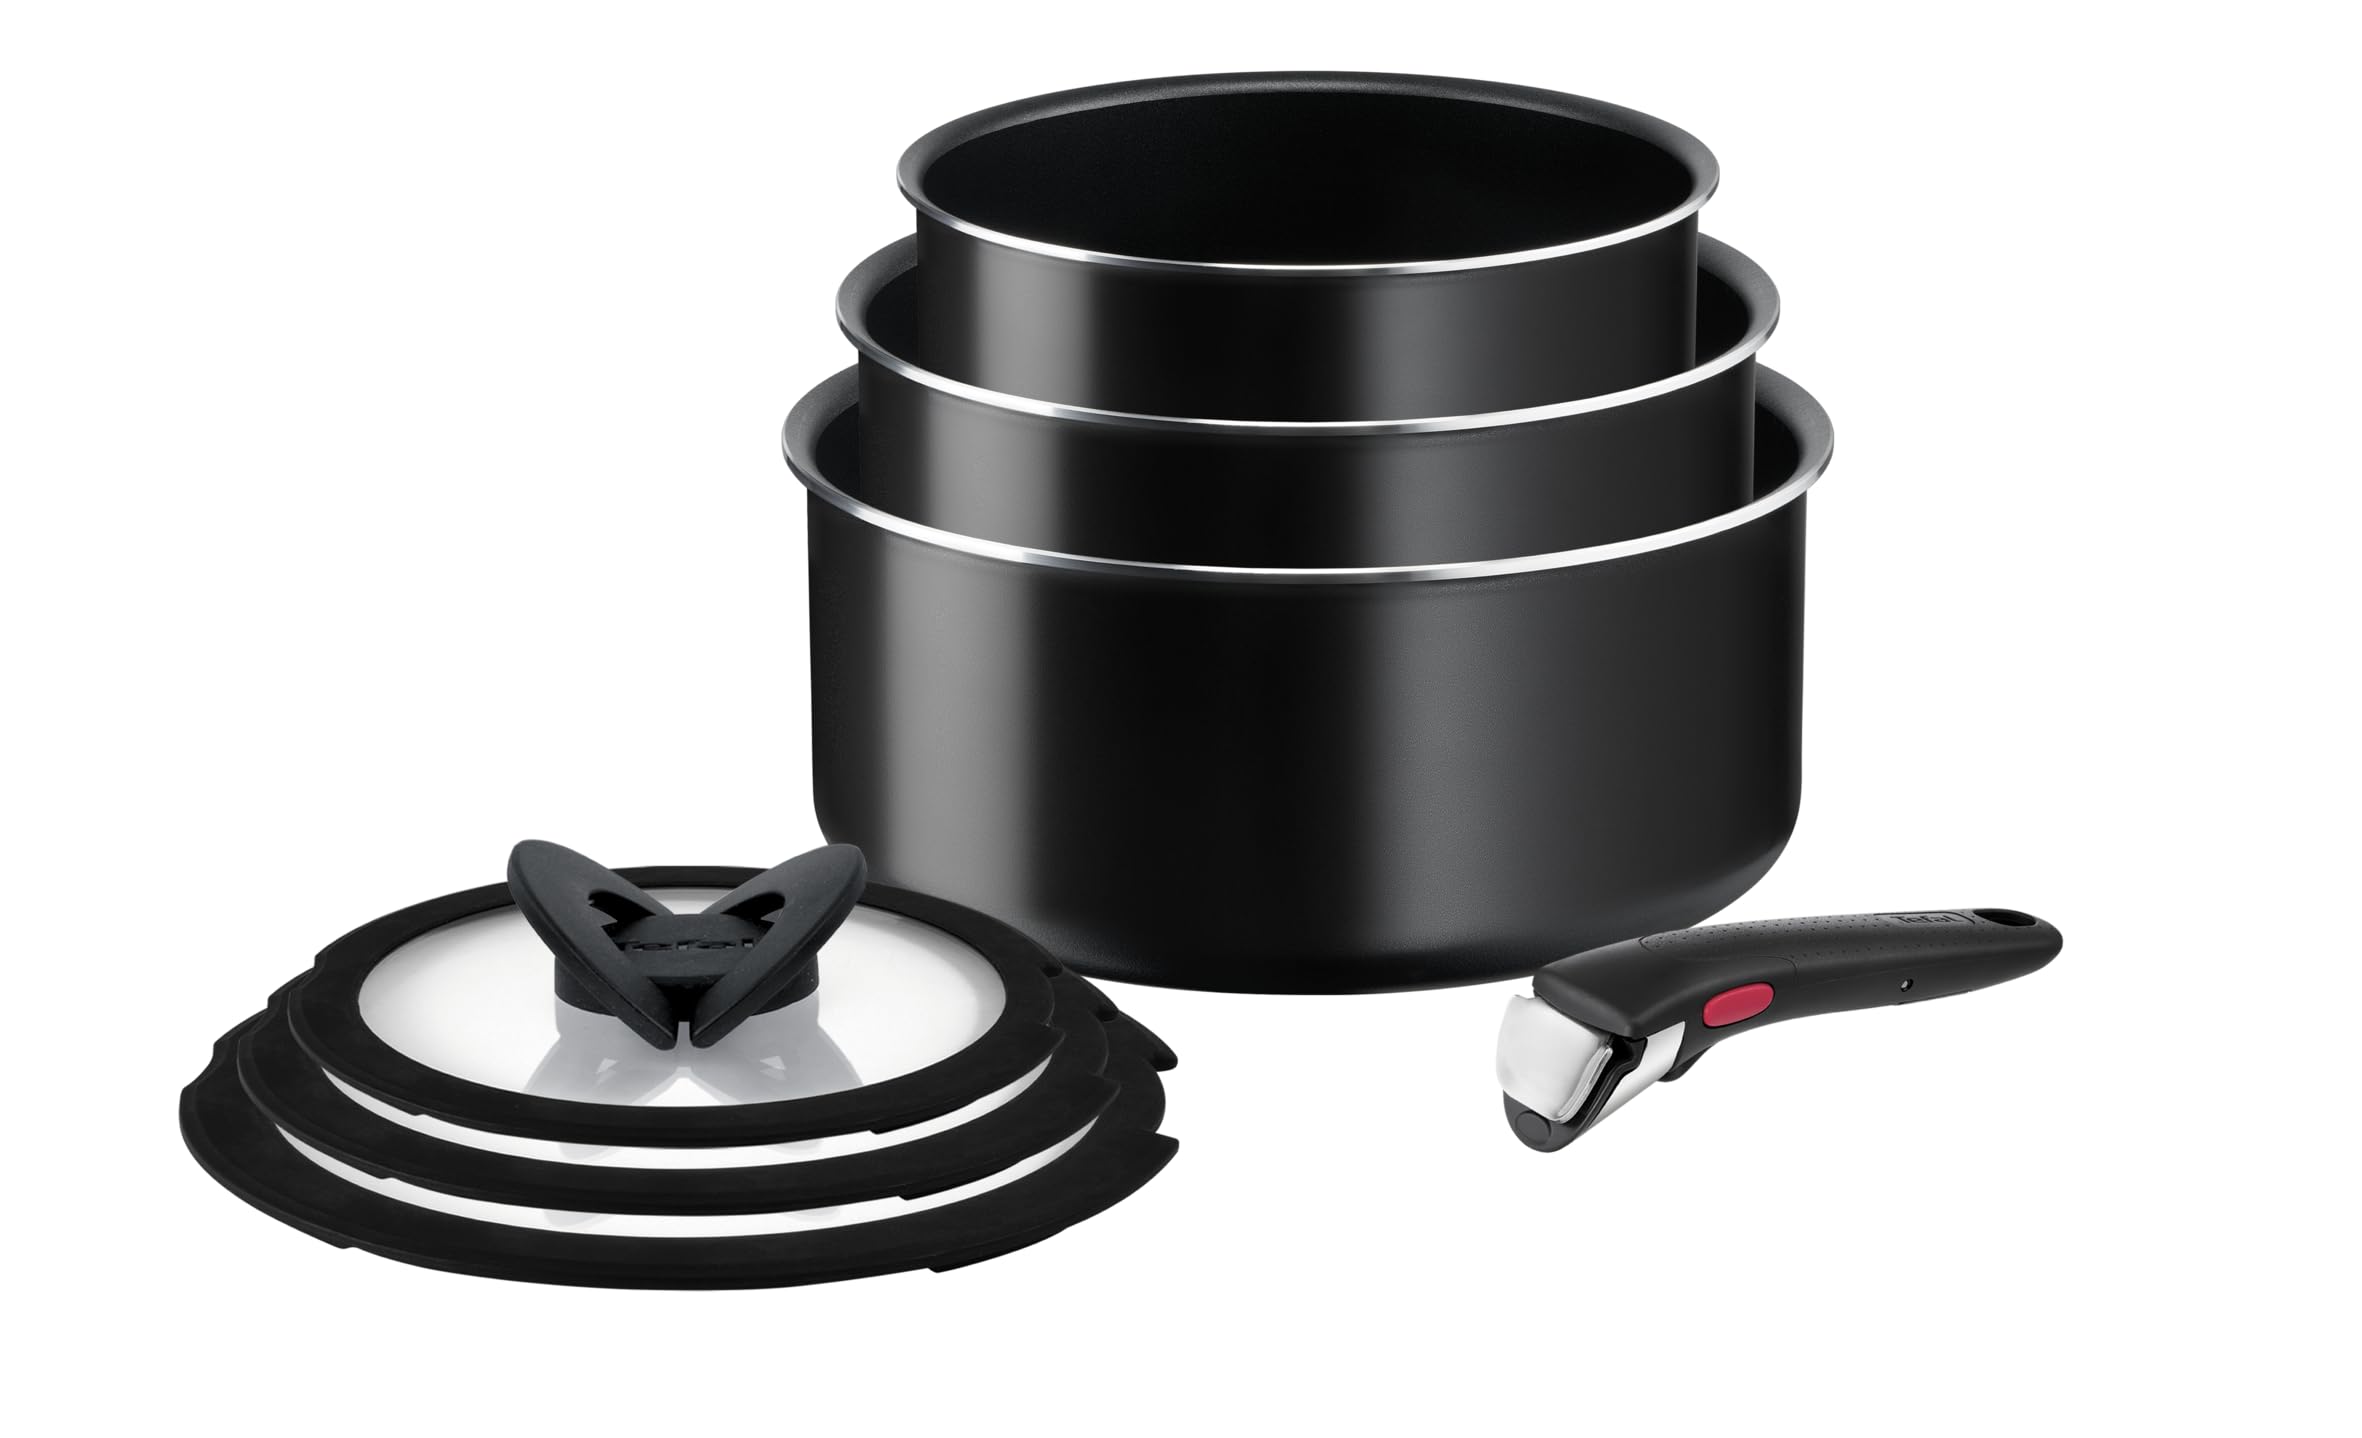 Tefal Cooking Set, Ingenio Easy On 7-piece Stackable cookware set with a removable handle, Non-Stick Coating, Heat Indicator, Diffusion Base, Healthy Cooking, Safe Cookware, Made in France, L1599602